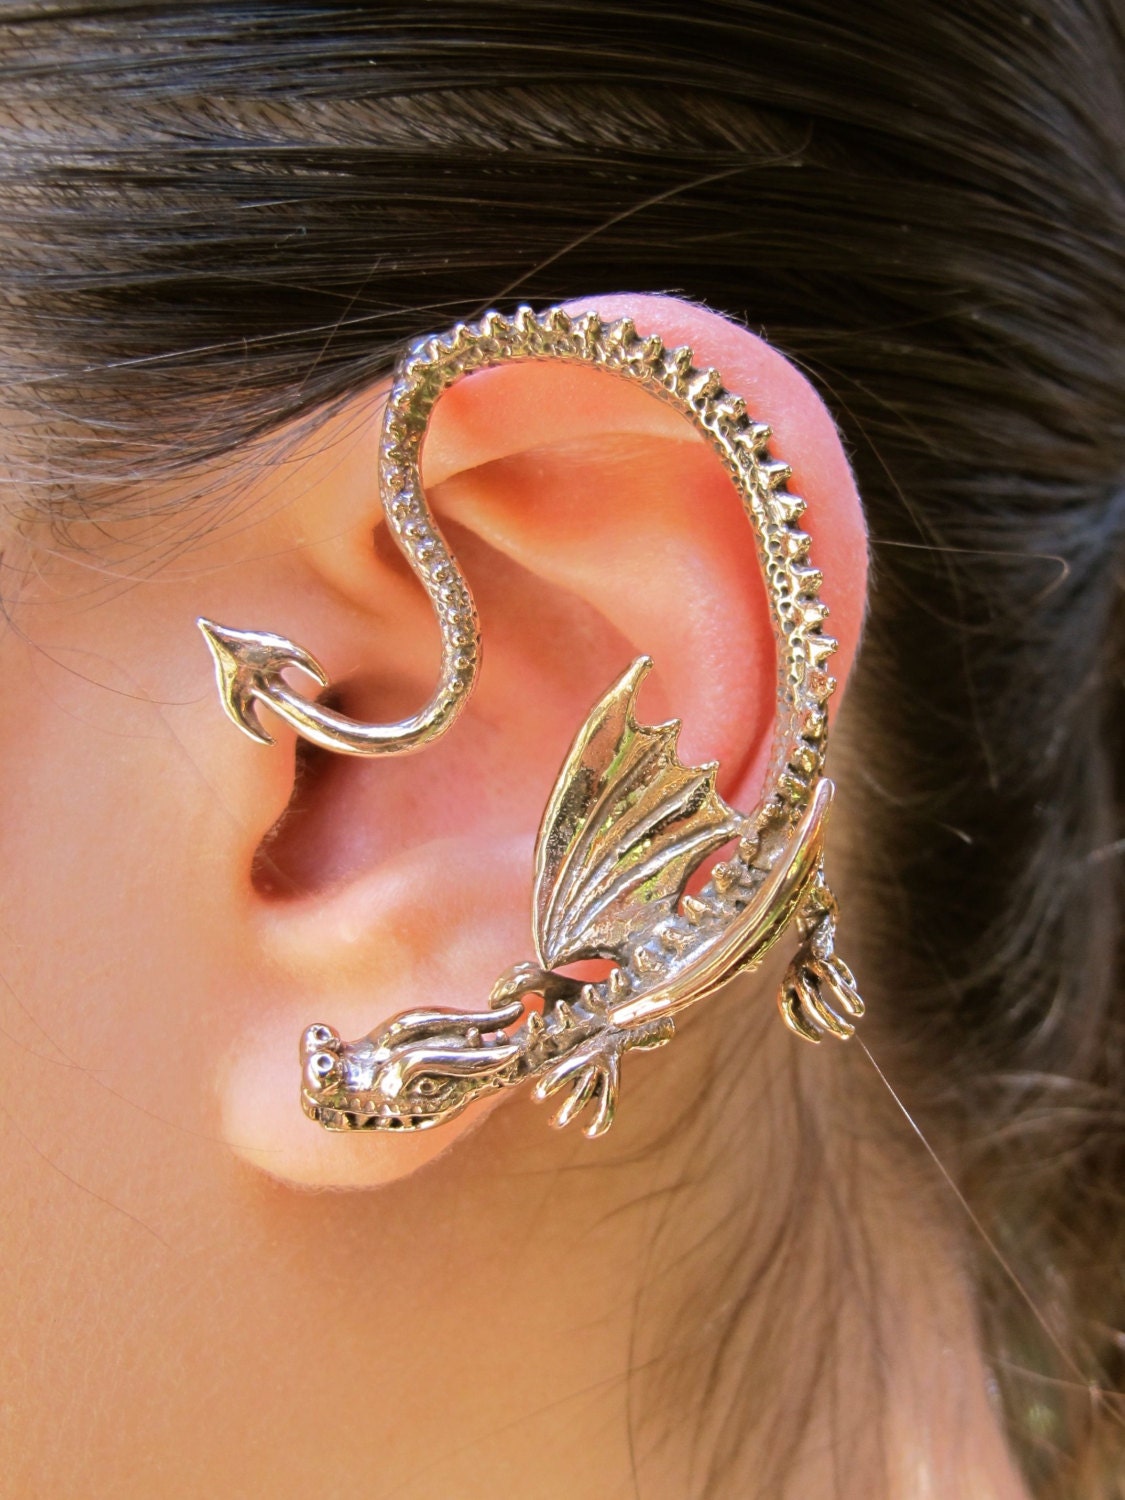 Aggregate 136+ game of thrones earrings best